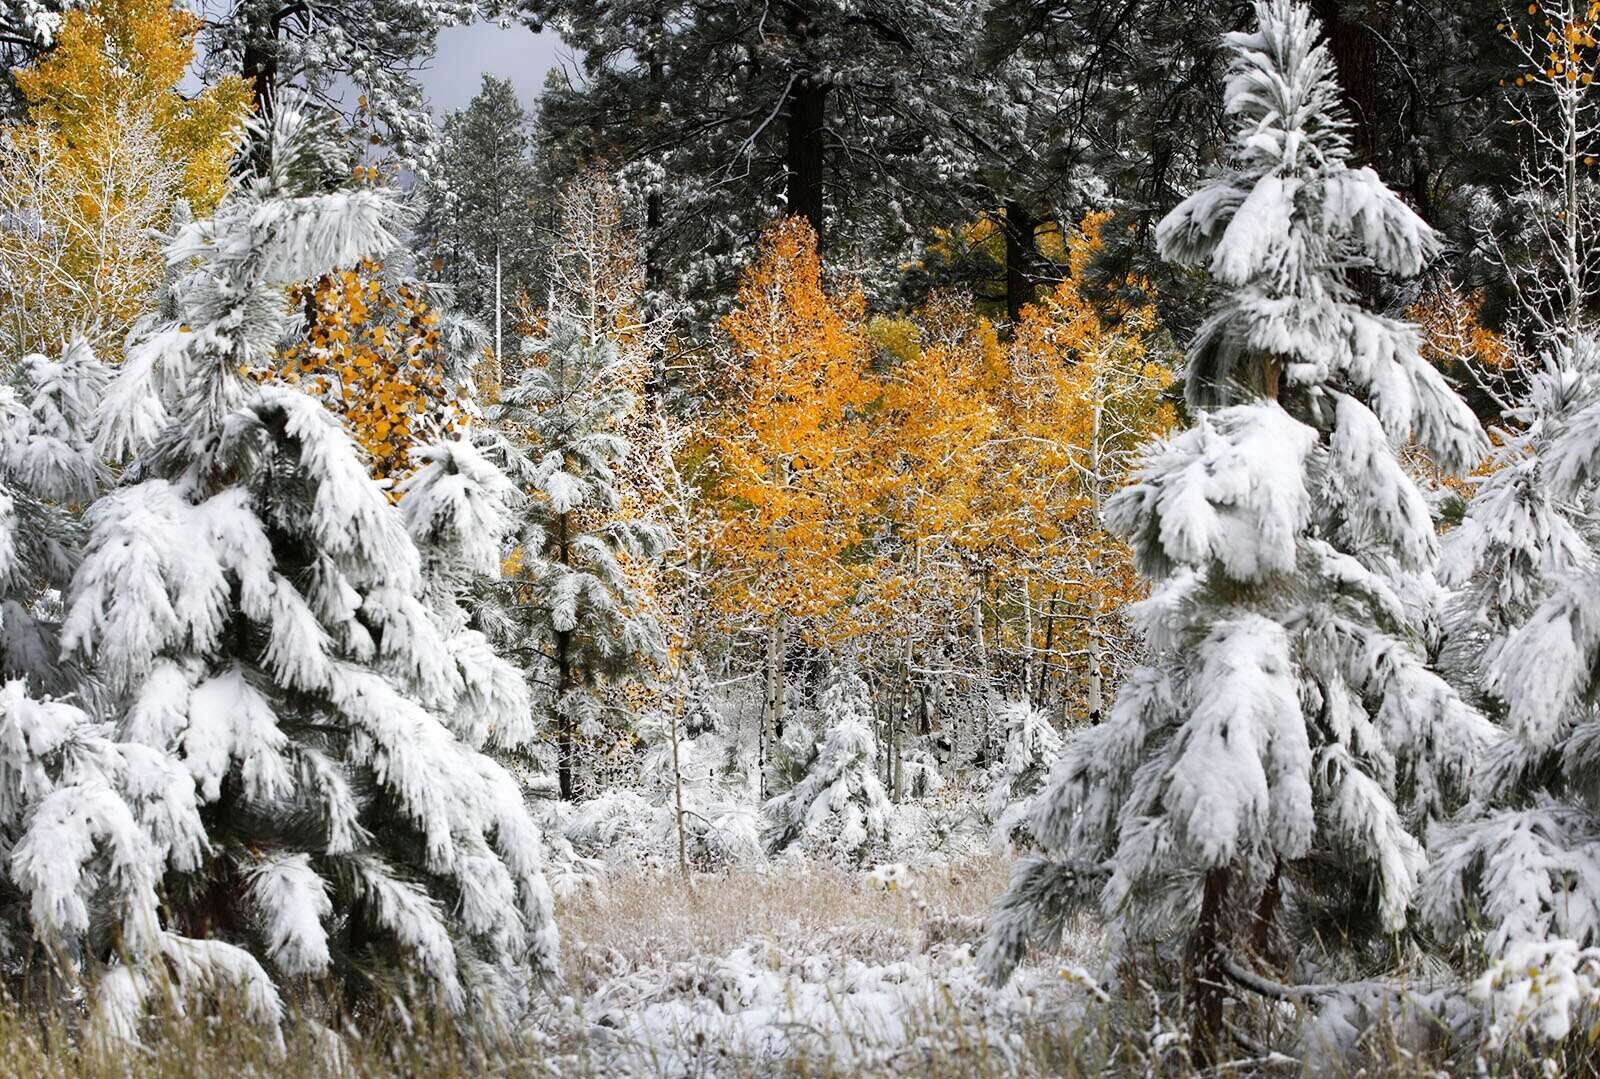 A winter storm took a toll on fall colors early